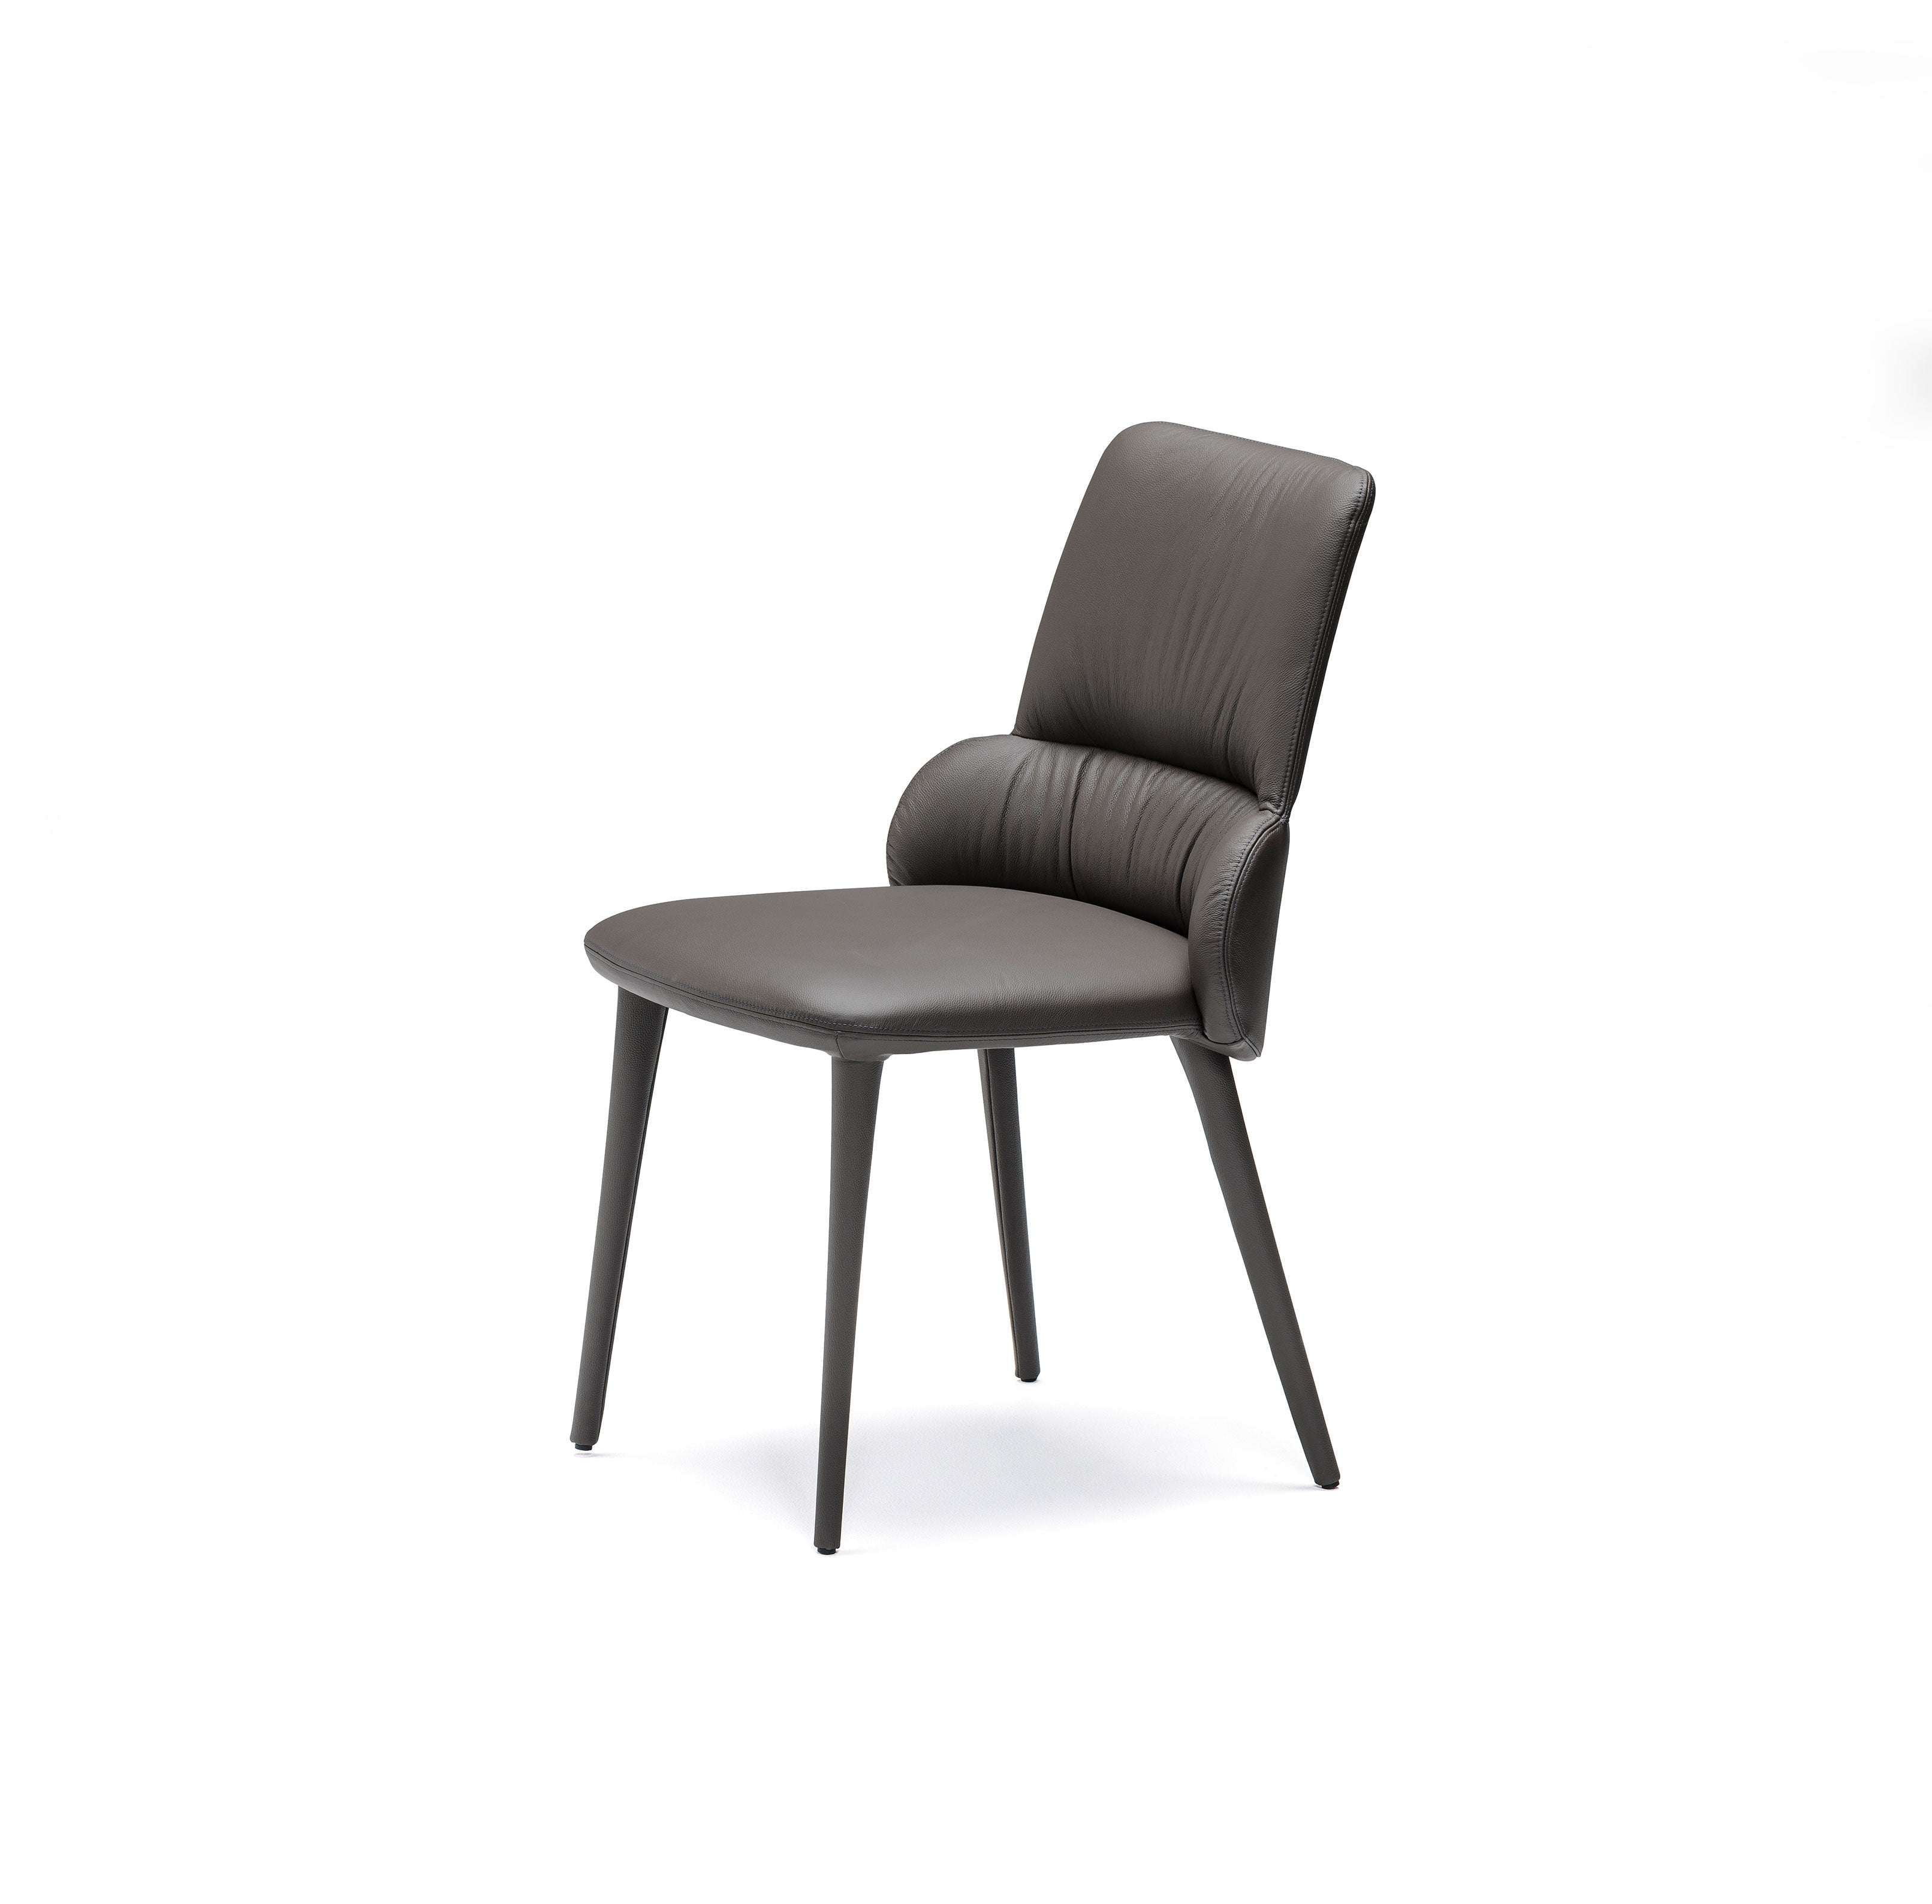 cattelan italia ginger Chair with steel frame and covered in fabric